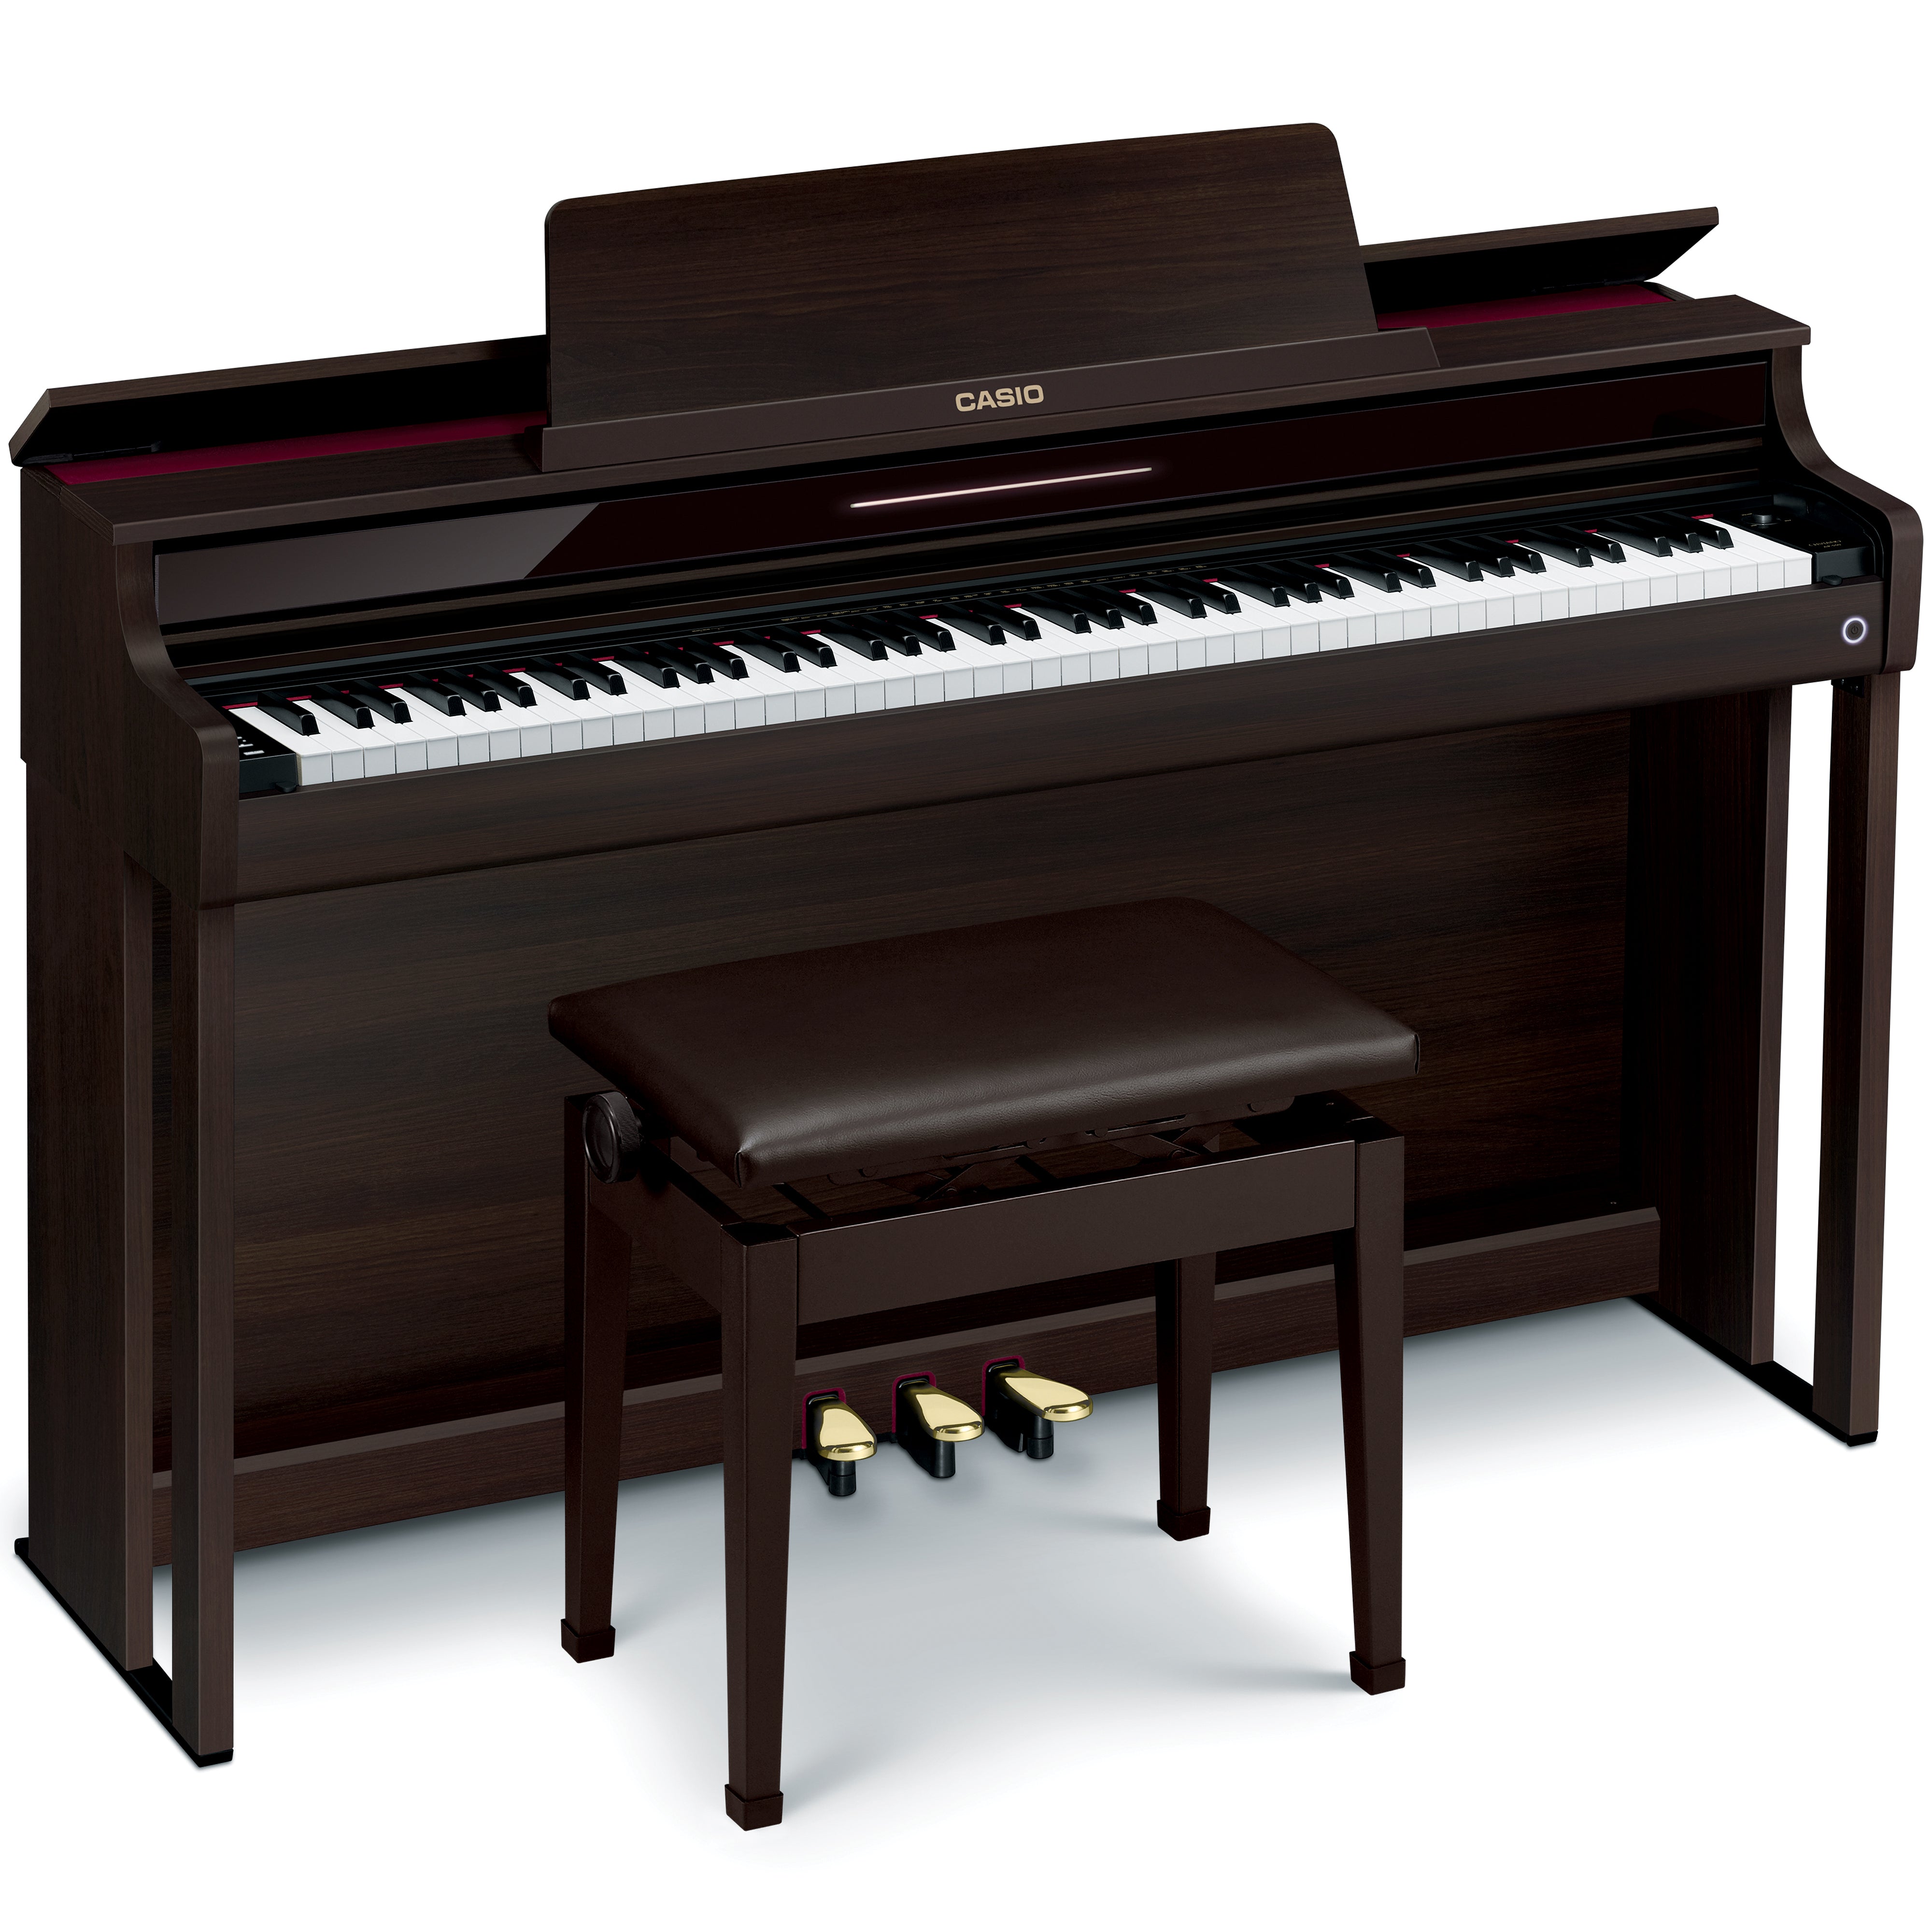 Casio Celviano AP-550 Digital Piano - Brown - facing right with lid open and bench